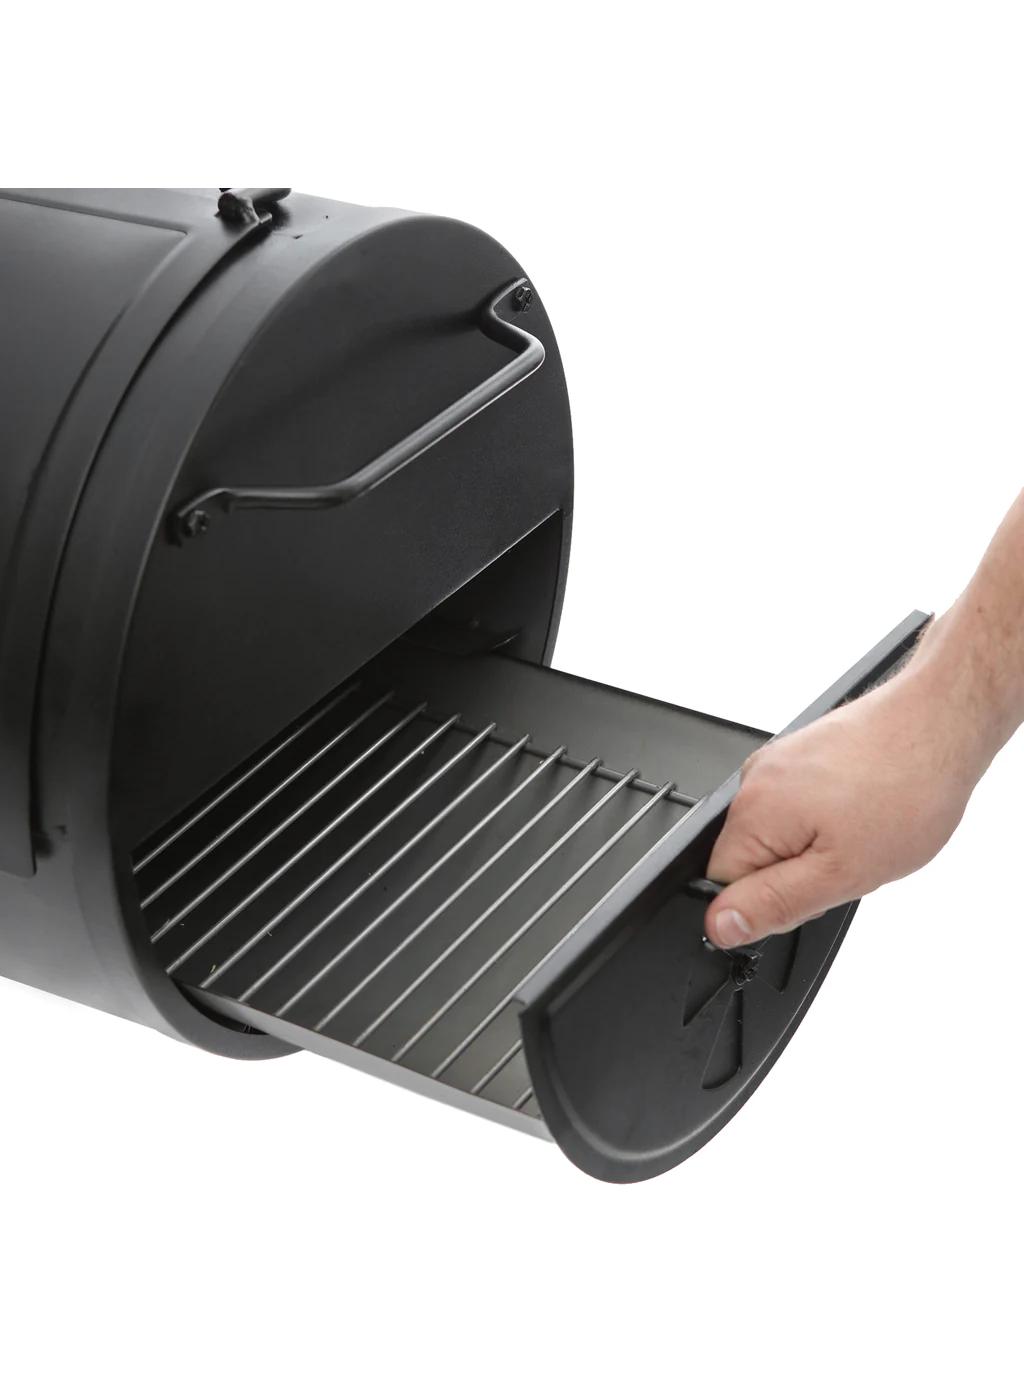 Char-Griller Portable Charcoal Grill & Side Fire Box; image 2 of 5